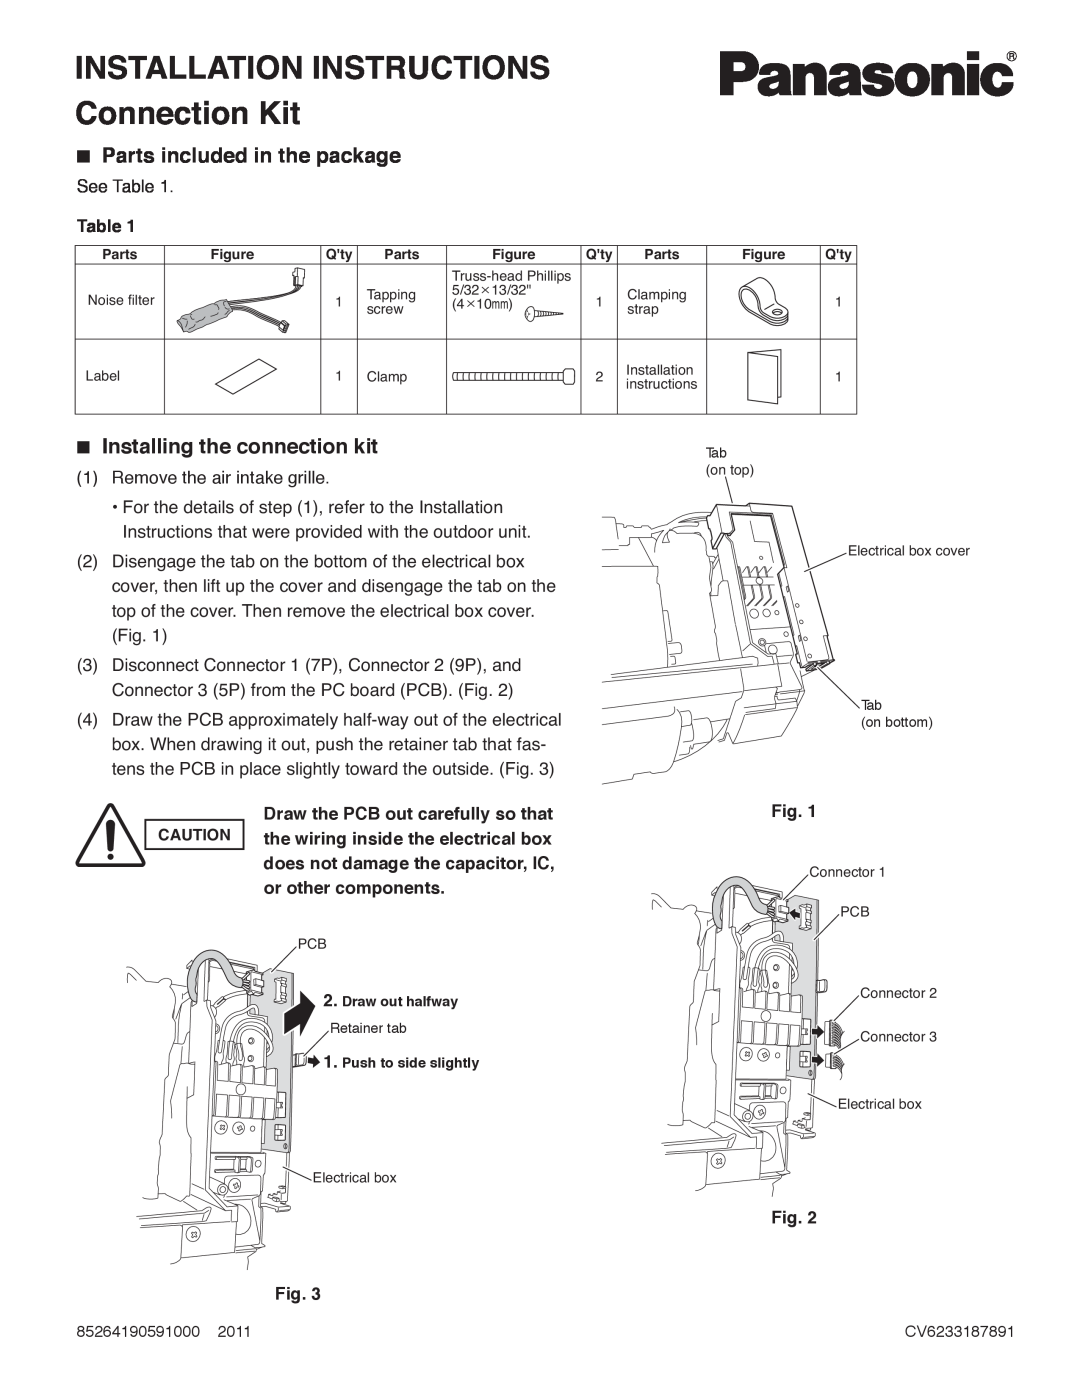 Panasonic CZ-RD515U service manual Parts included in the package, Installing the connection kit 